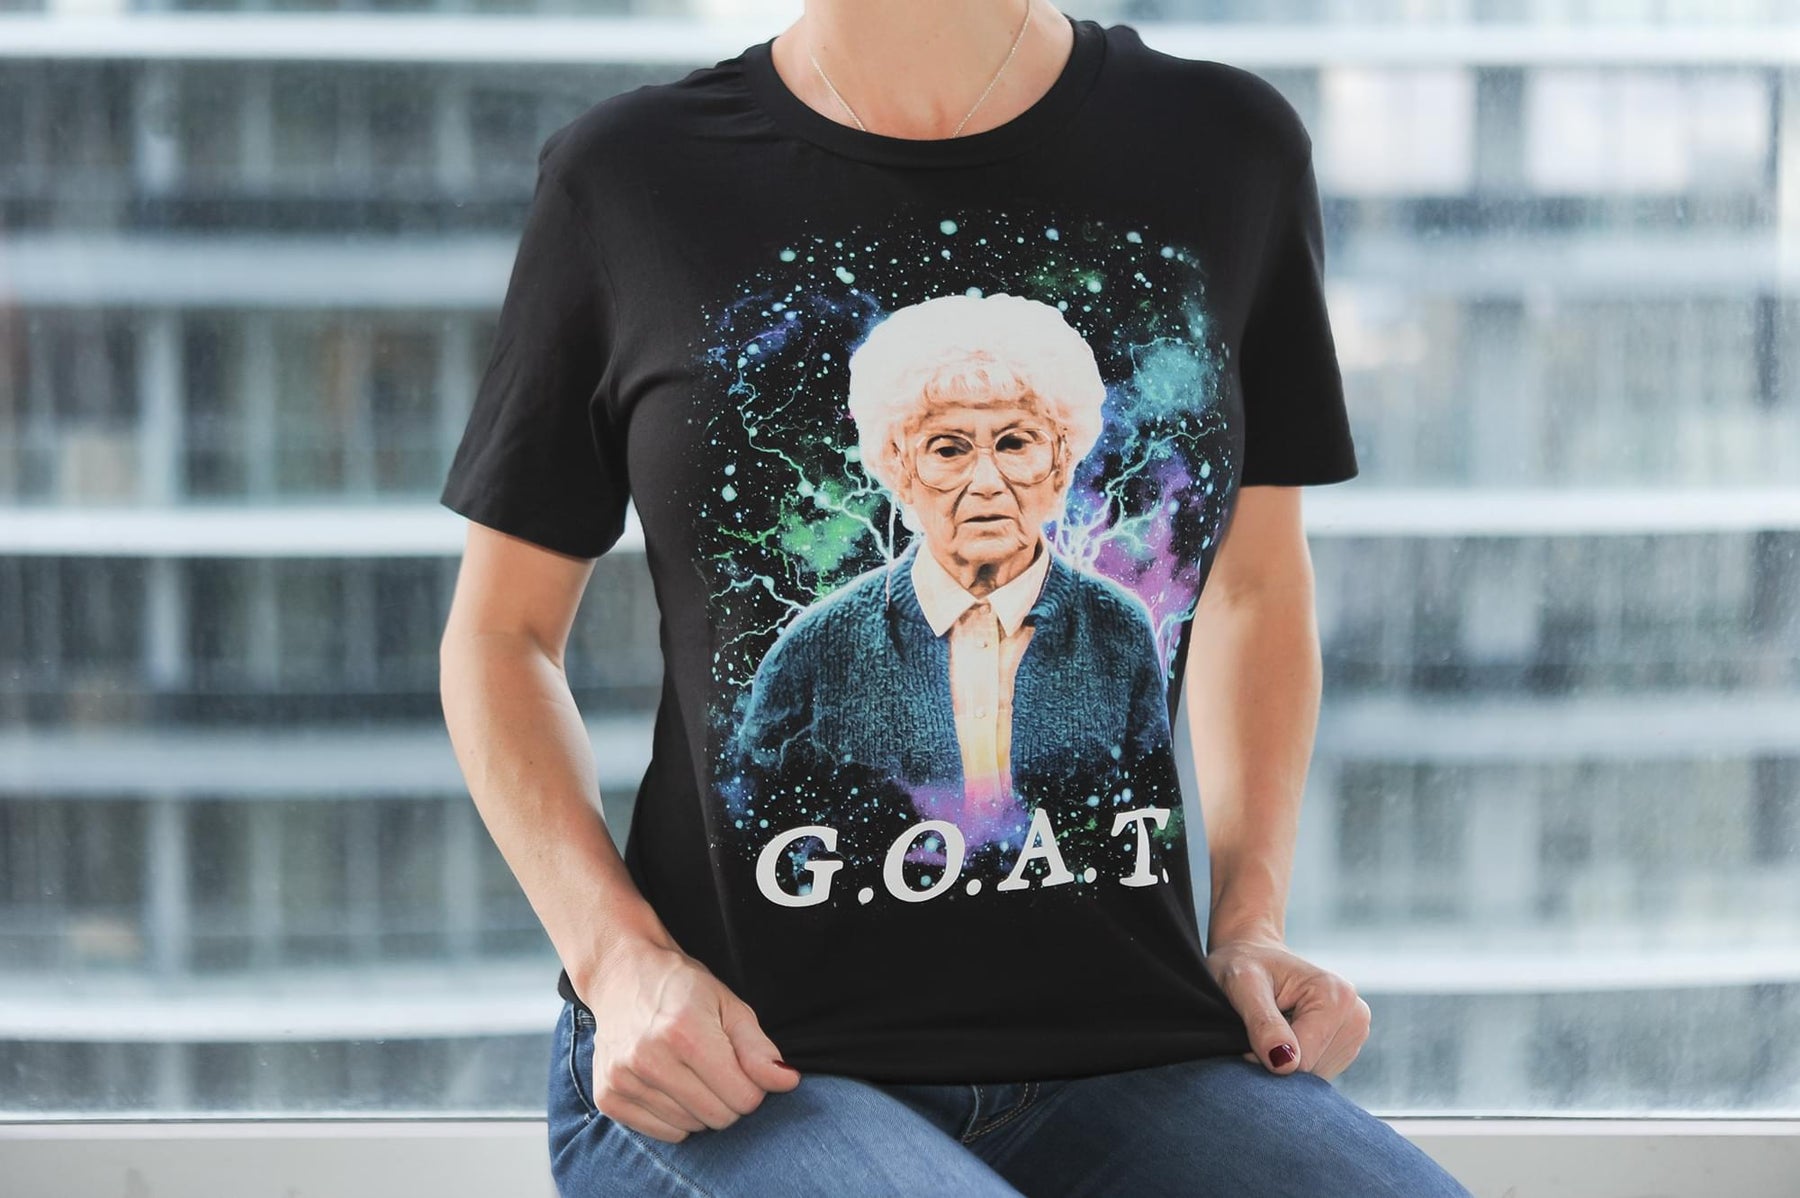 The Golden Girls Exclusive Sophia G.O.A.T Graphic Black T-Shirt